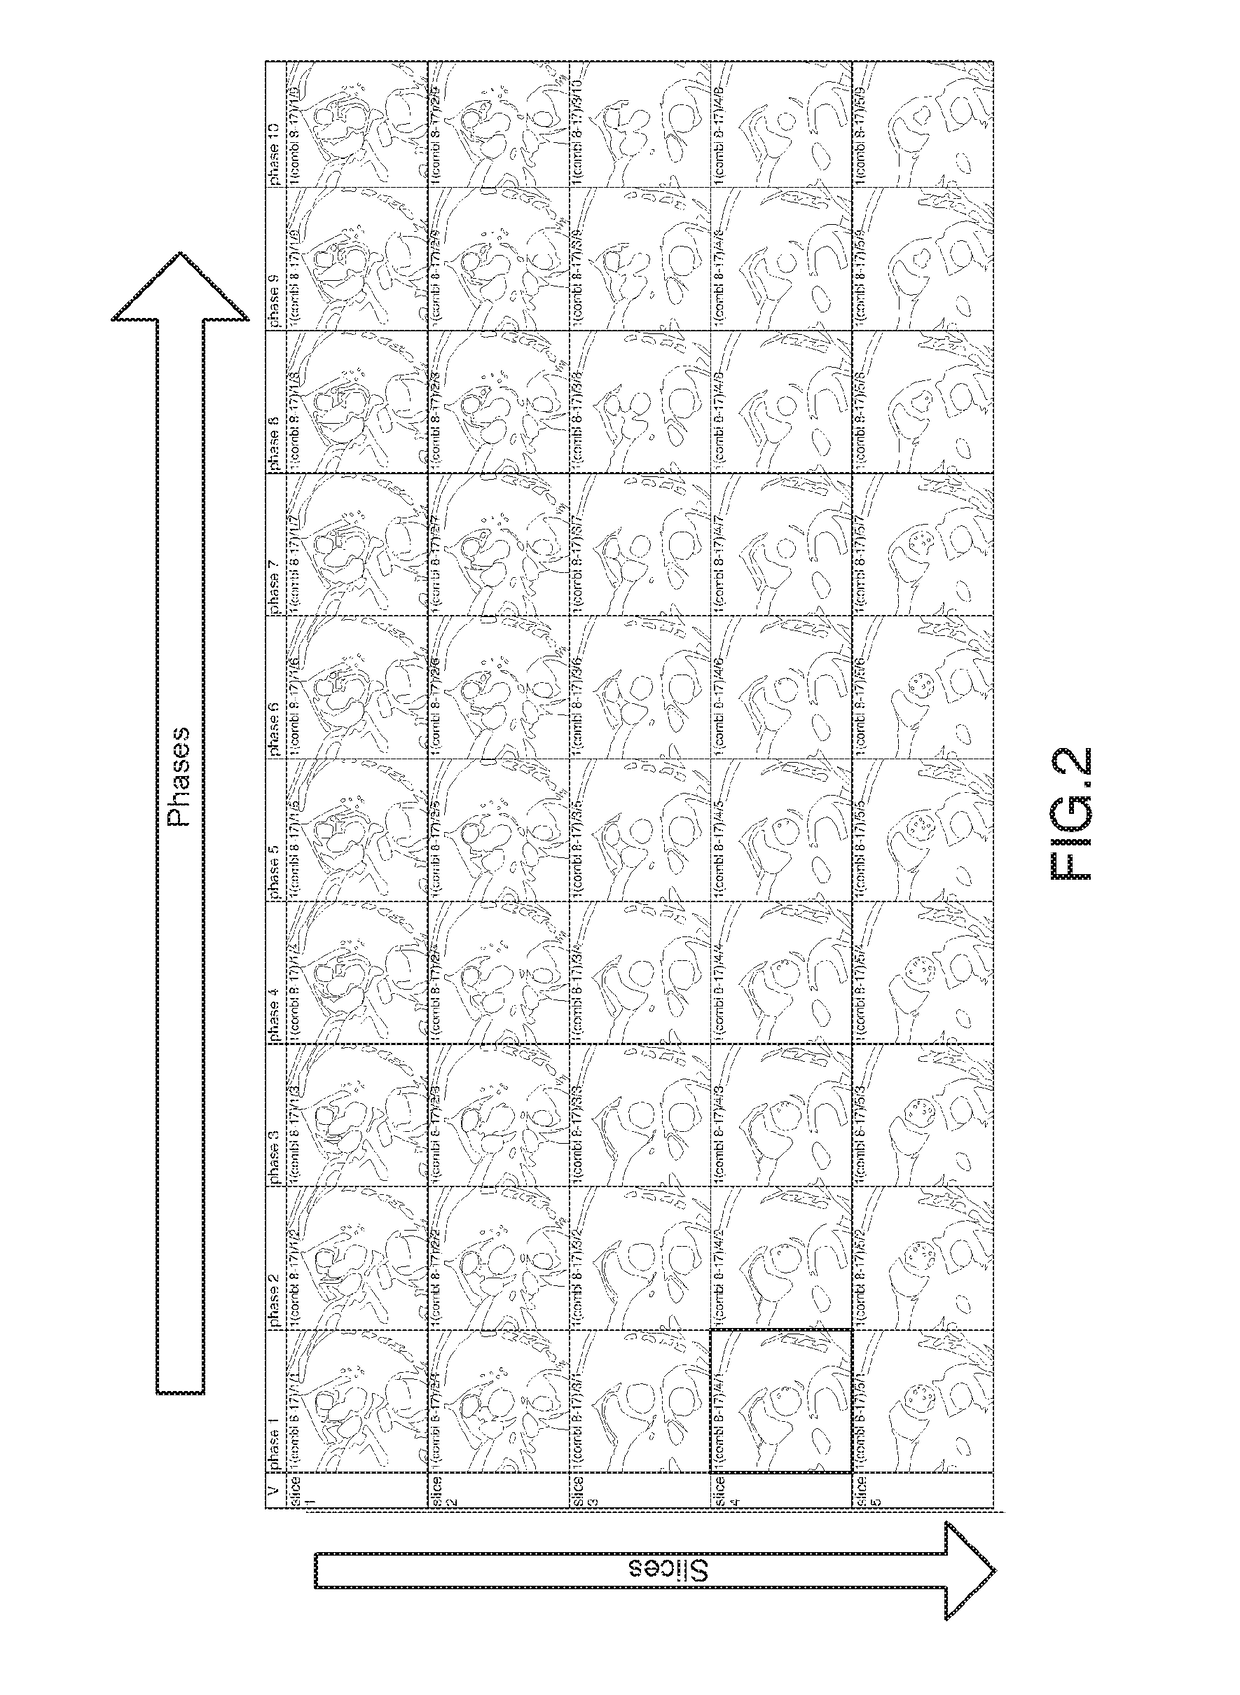 Method and System for Analysis of Myocardial Wall Dynamics